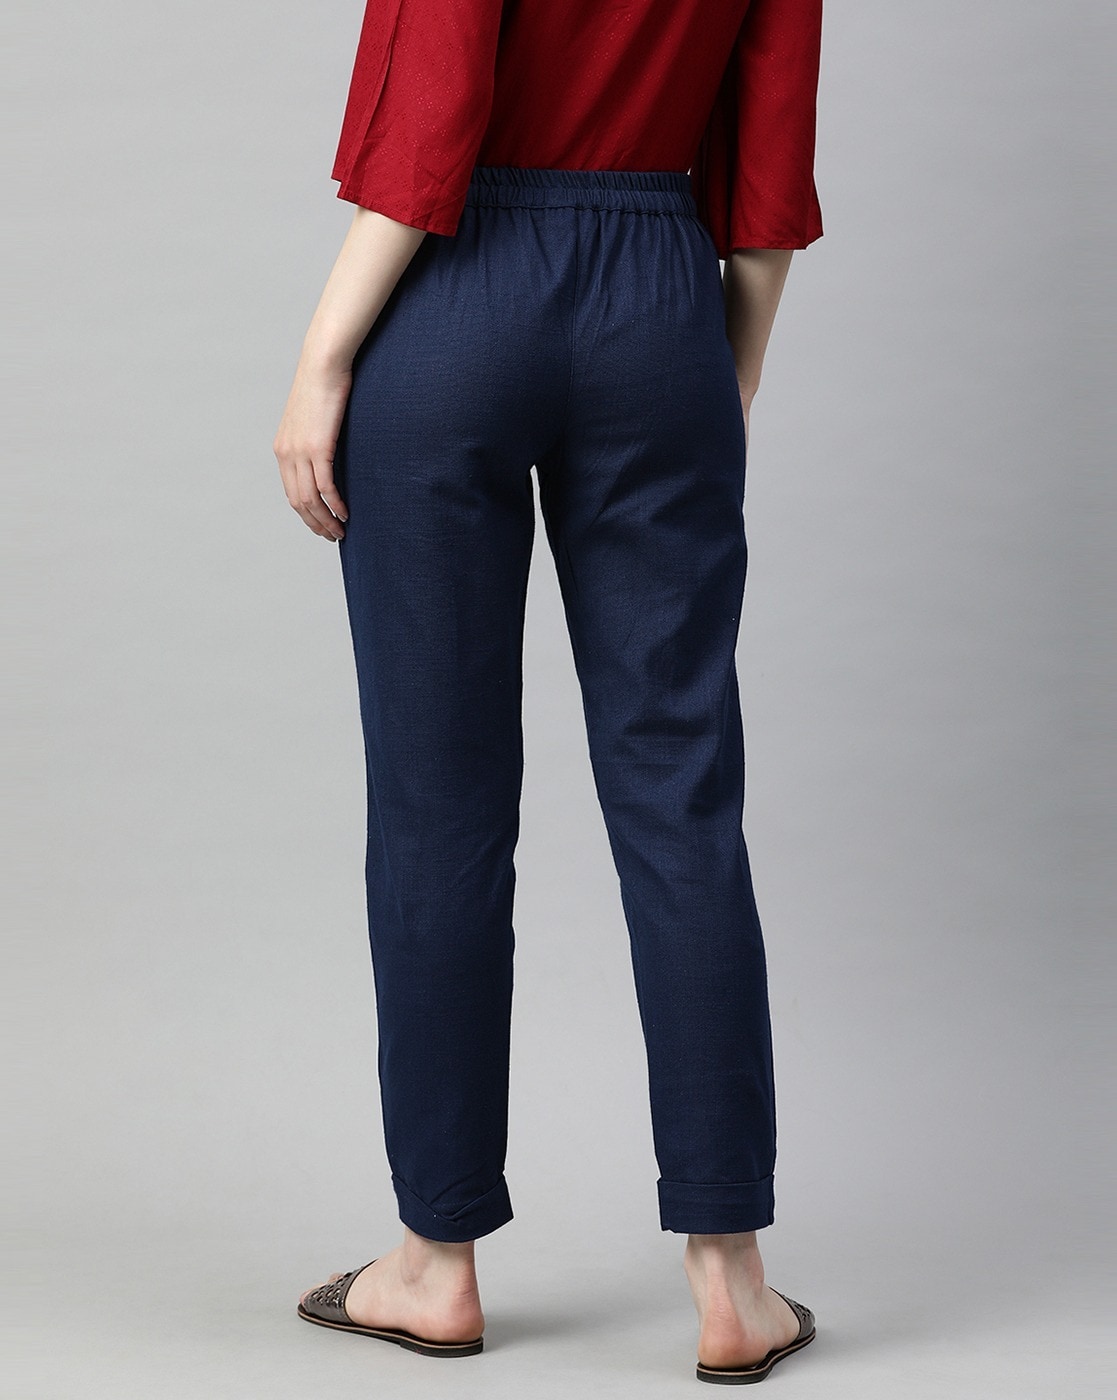 Rayon Blue Ladies Check Print Casual Trouser at Rs 215/25 piece in Jaipur